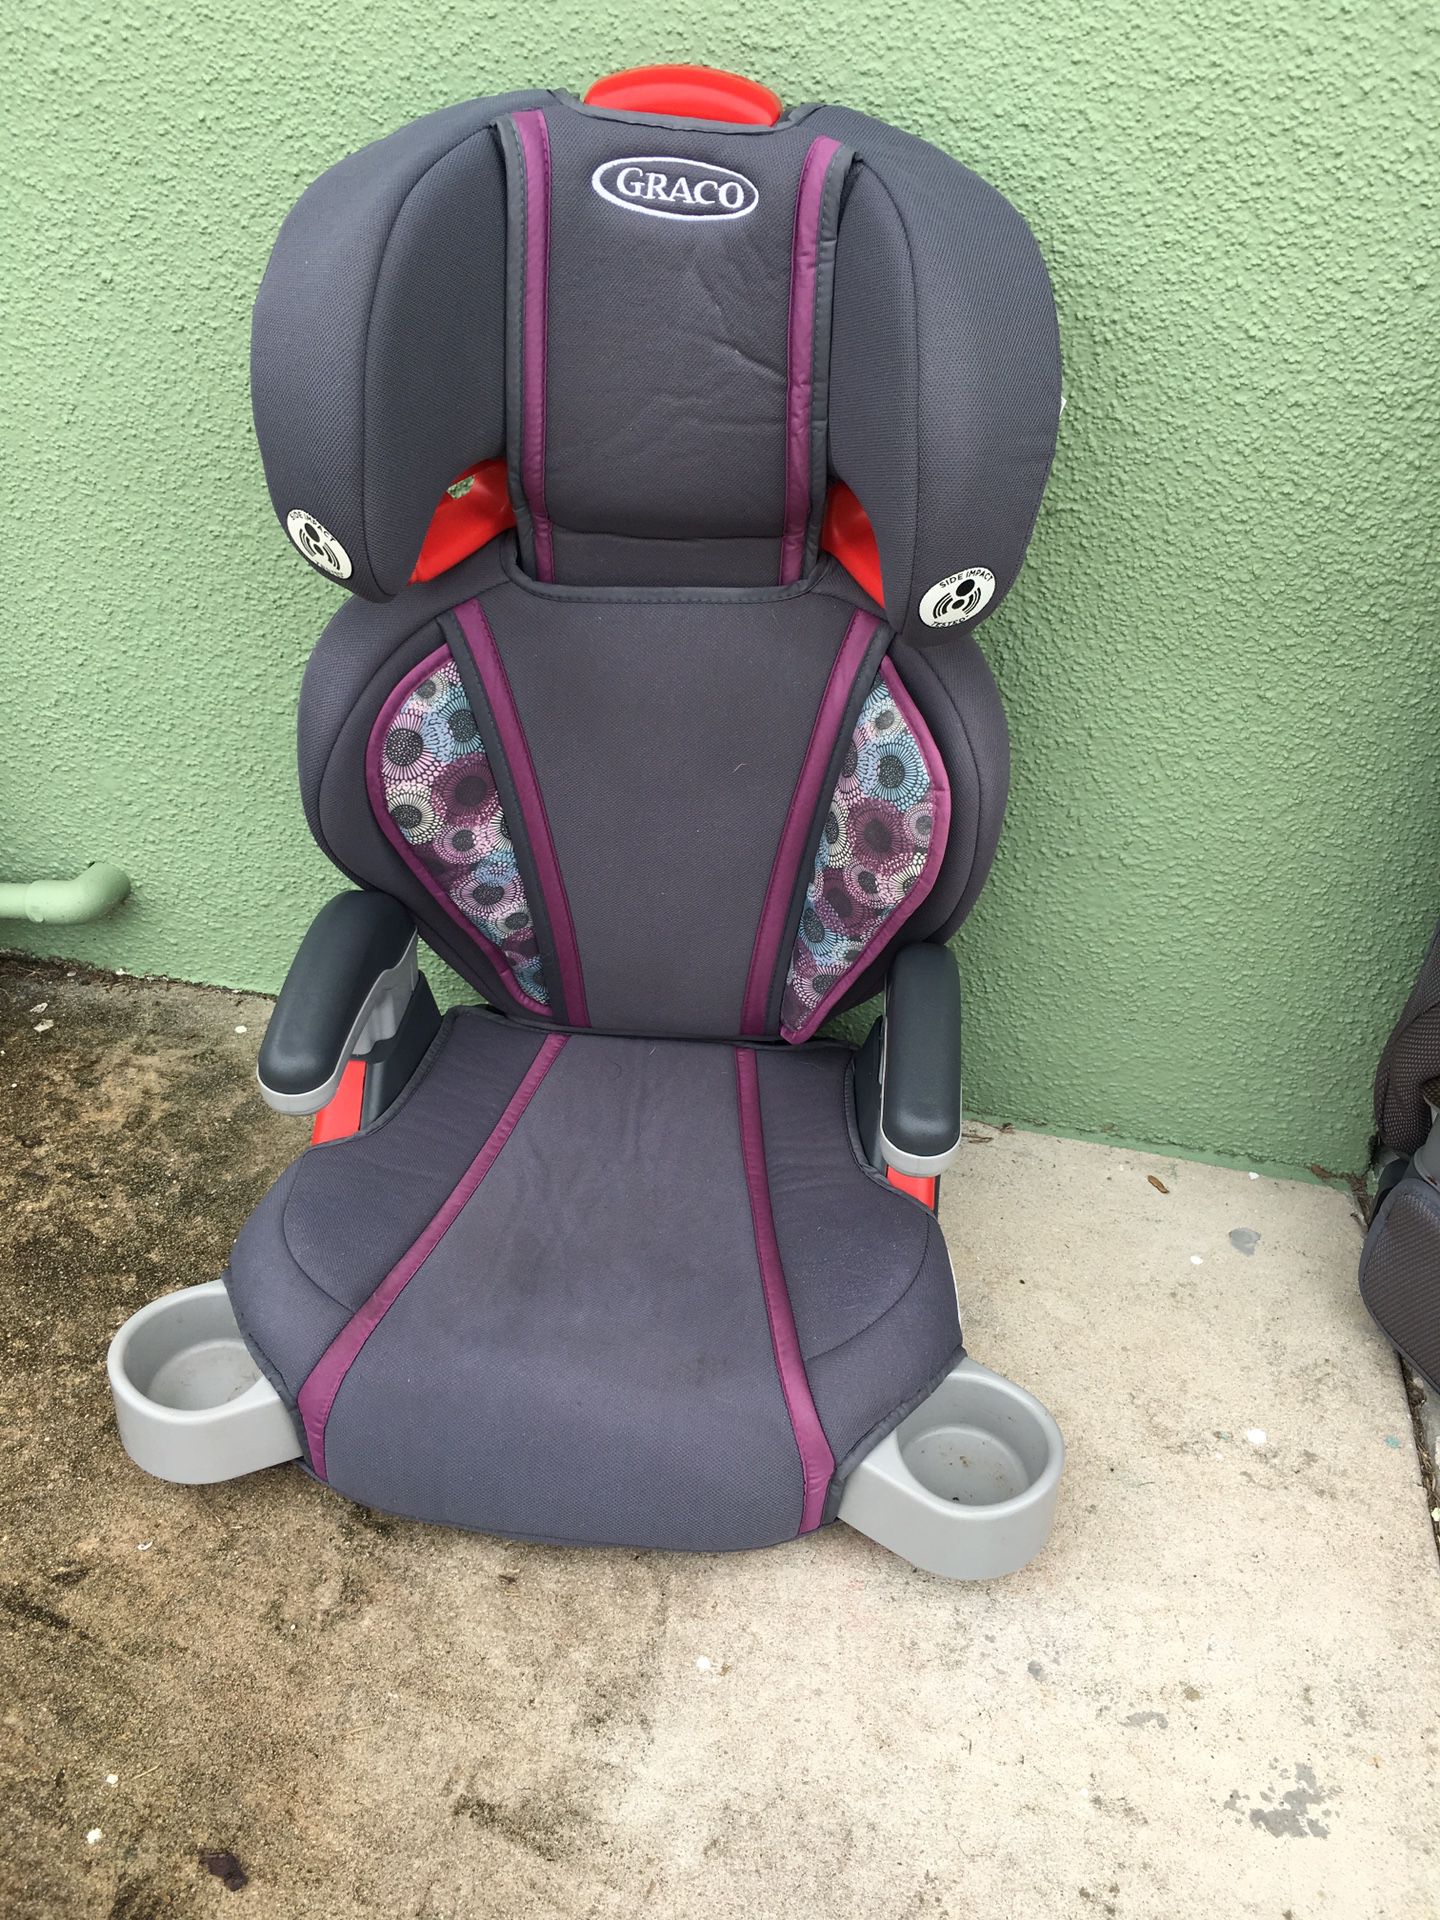 Grace high back booster car seat